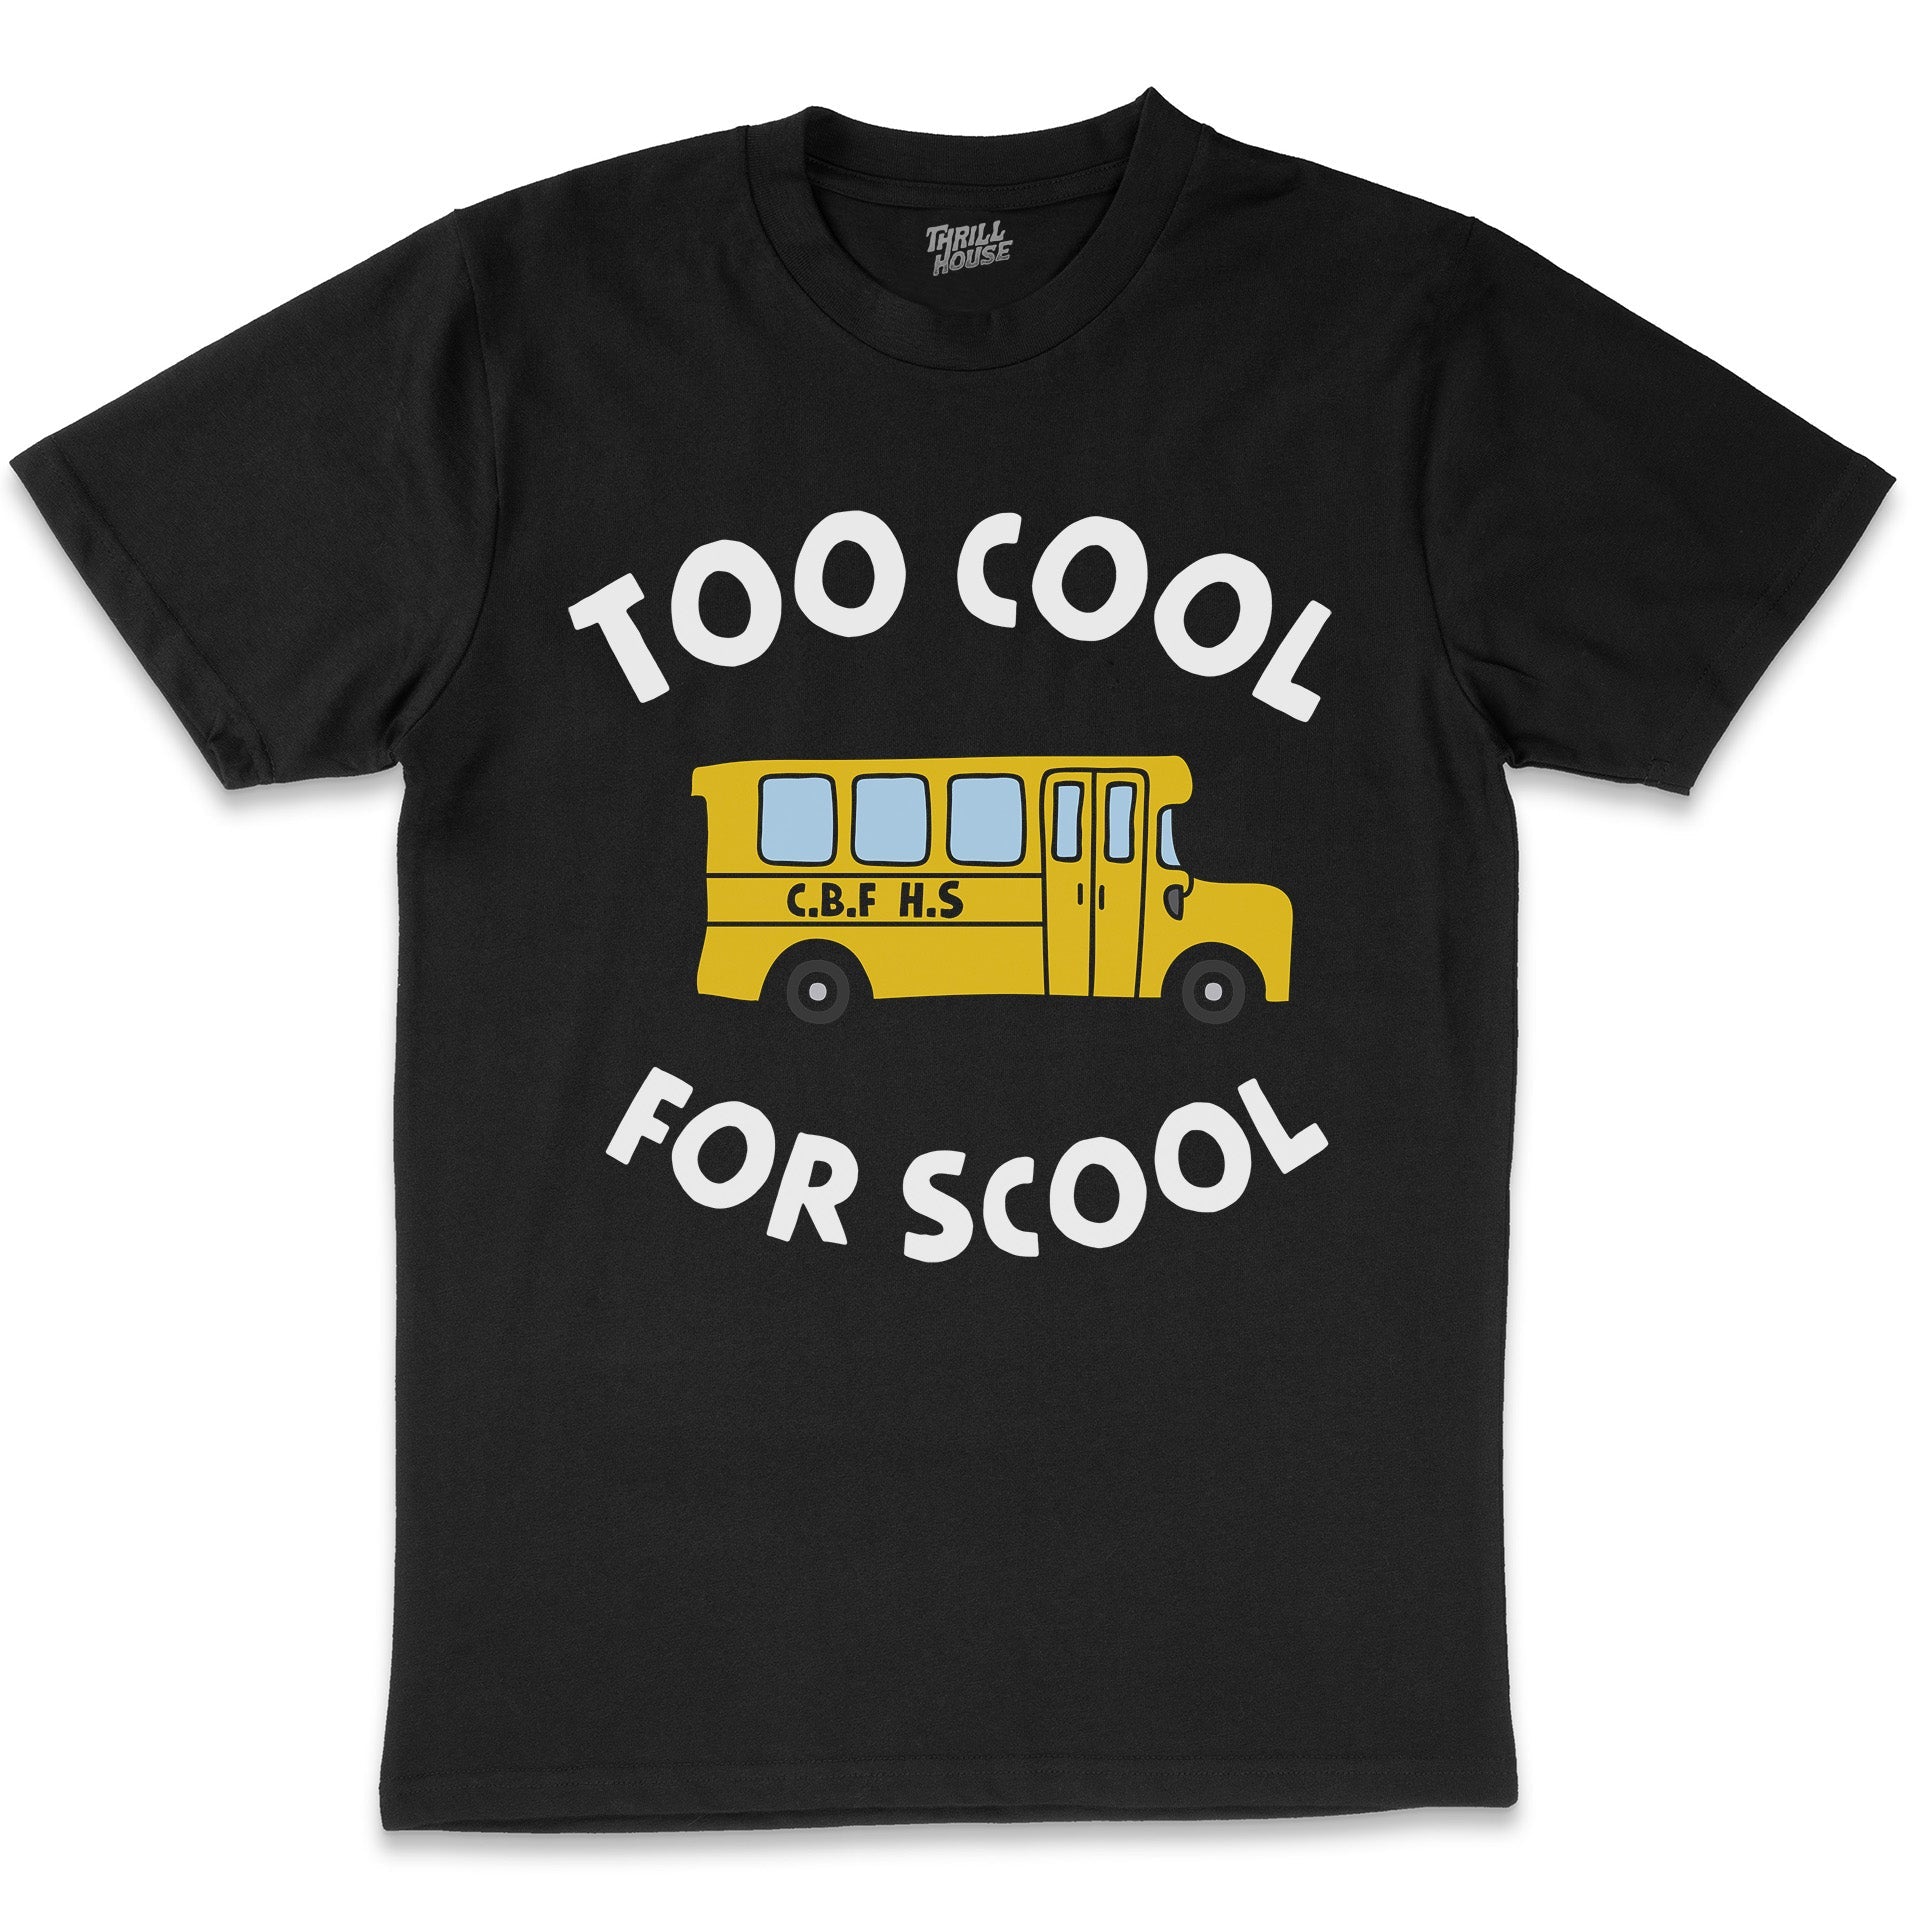 Too Cool for School Funny Humorous Education Parody Cotton T-Shirt